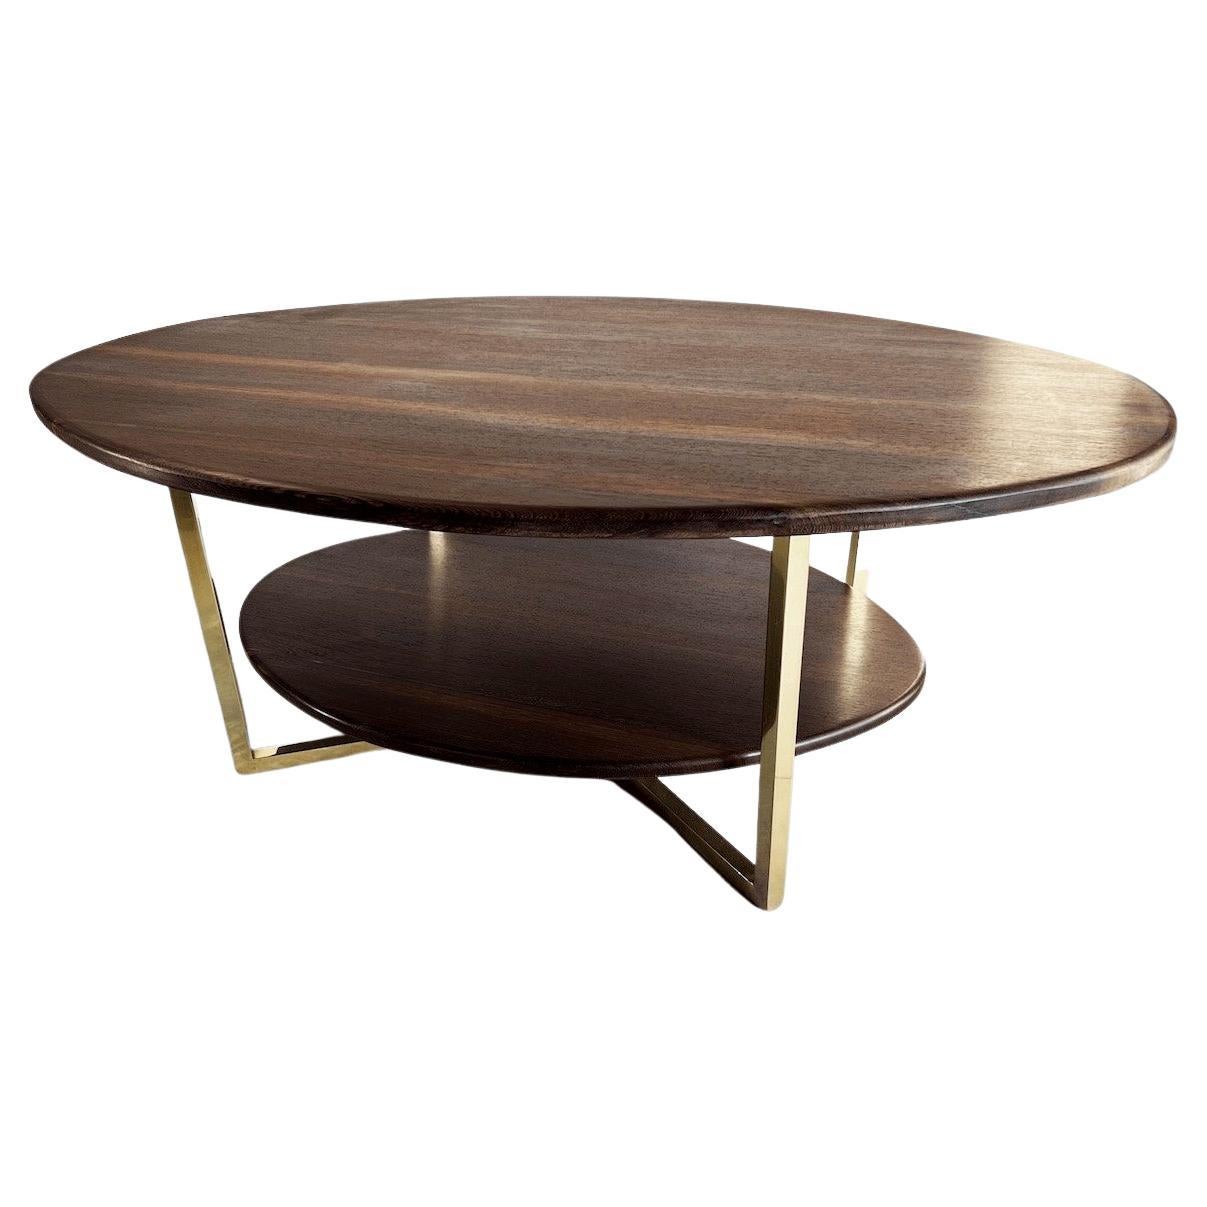 Safari by Seve Quantum Design 'France', Wenge & Brass Coffee Table For Sale